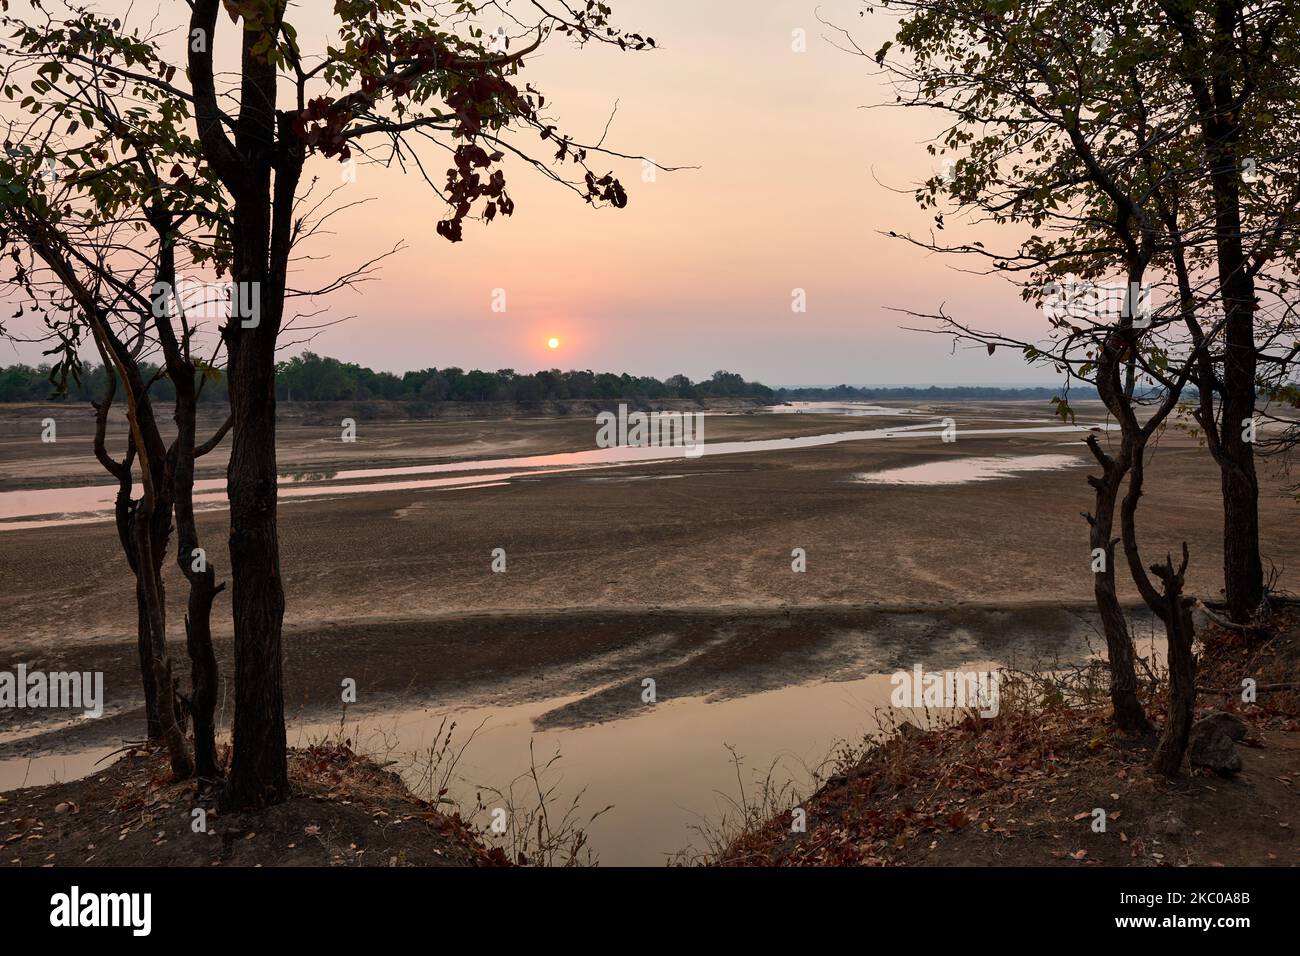 Sunset at South Luangwa river, South Luangwa National Park, Zambia, Africa Stock Photo